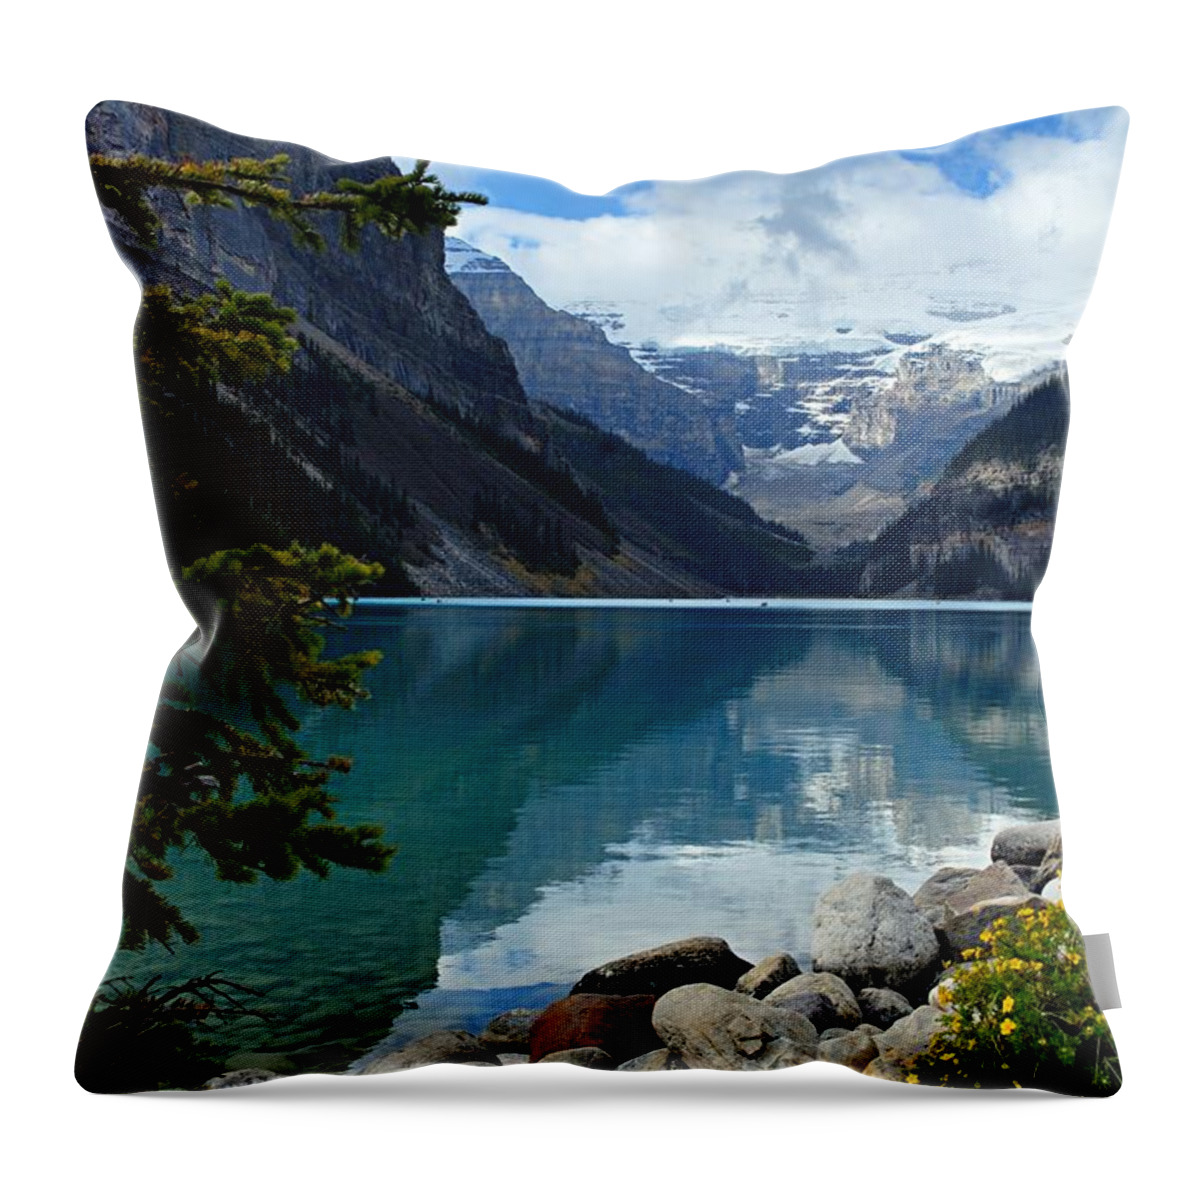 Lake Louise Throw Pillow featuring the photograph Lake Louise 2 by Larry Ricker